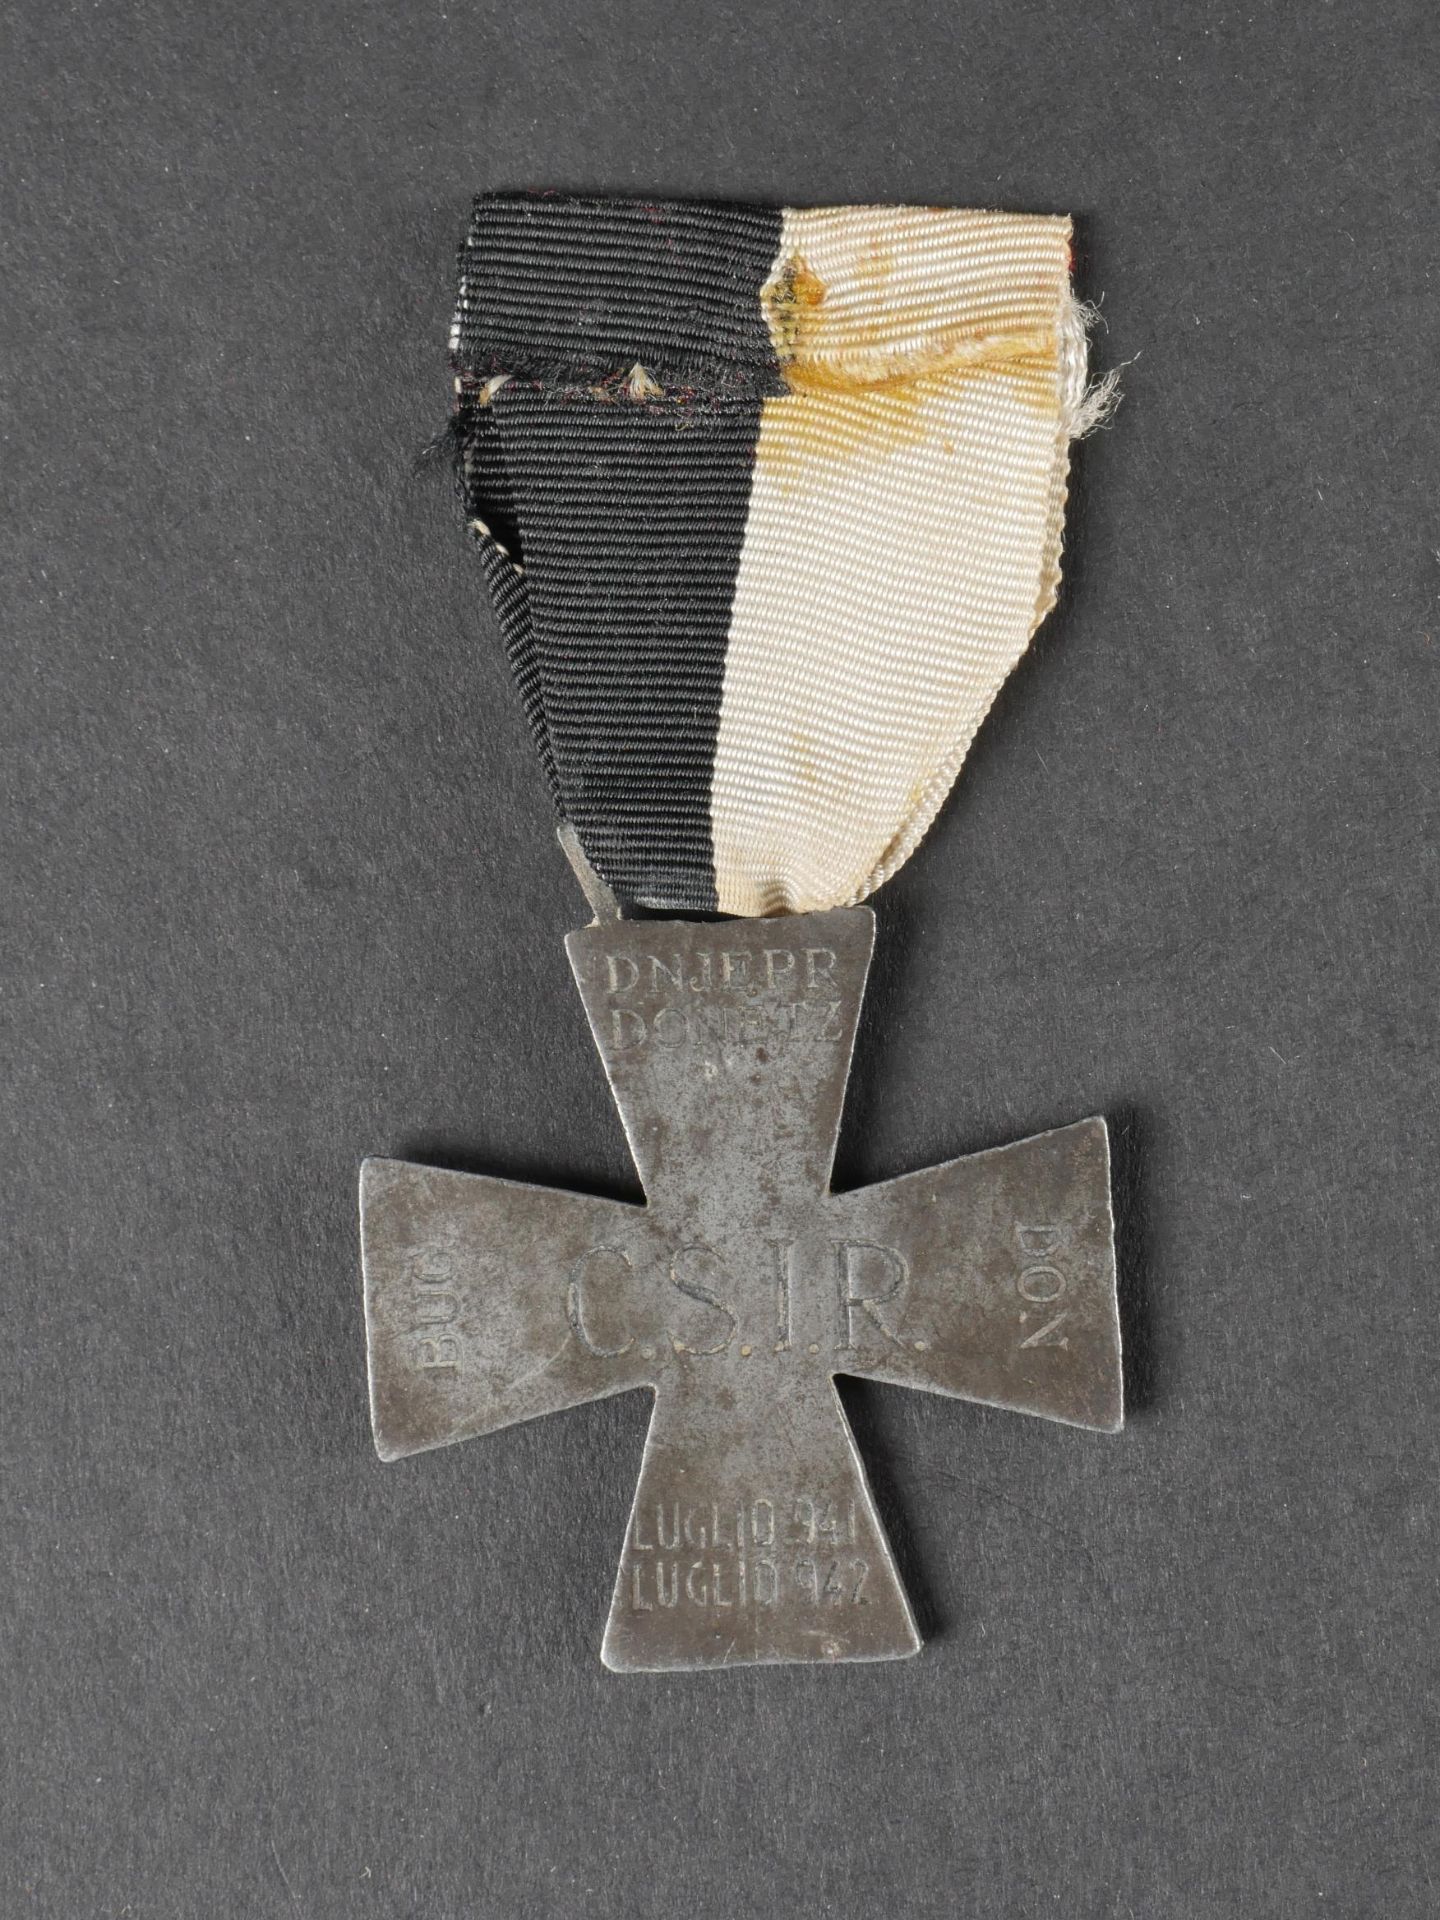 Croix du Corps expeditionnaire italien en Russie. Cross of the Italian Expeditionary Corps in Russia - Image 2 of 2